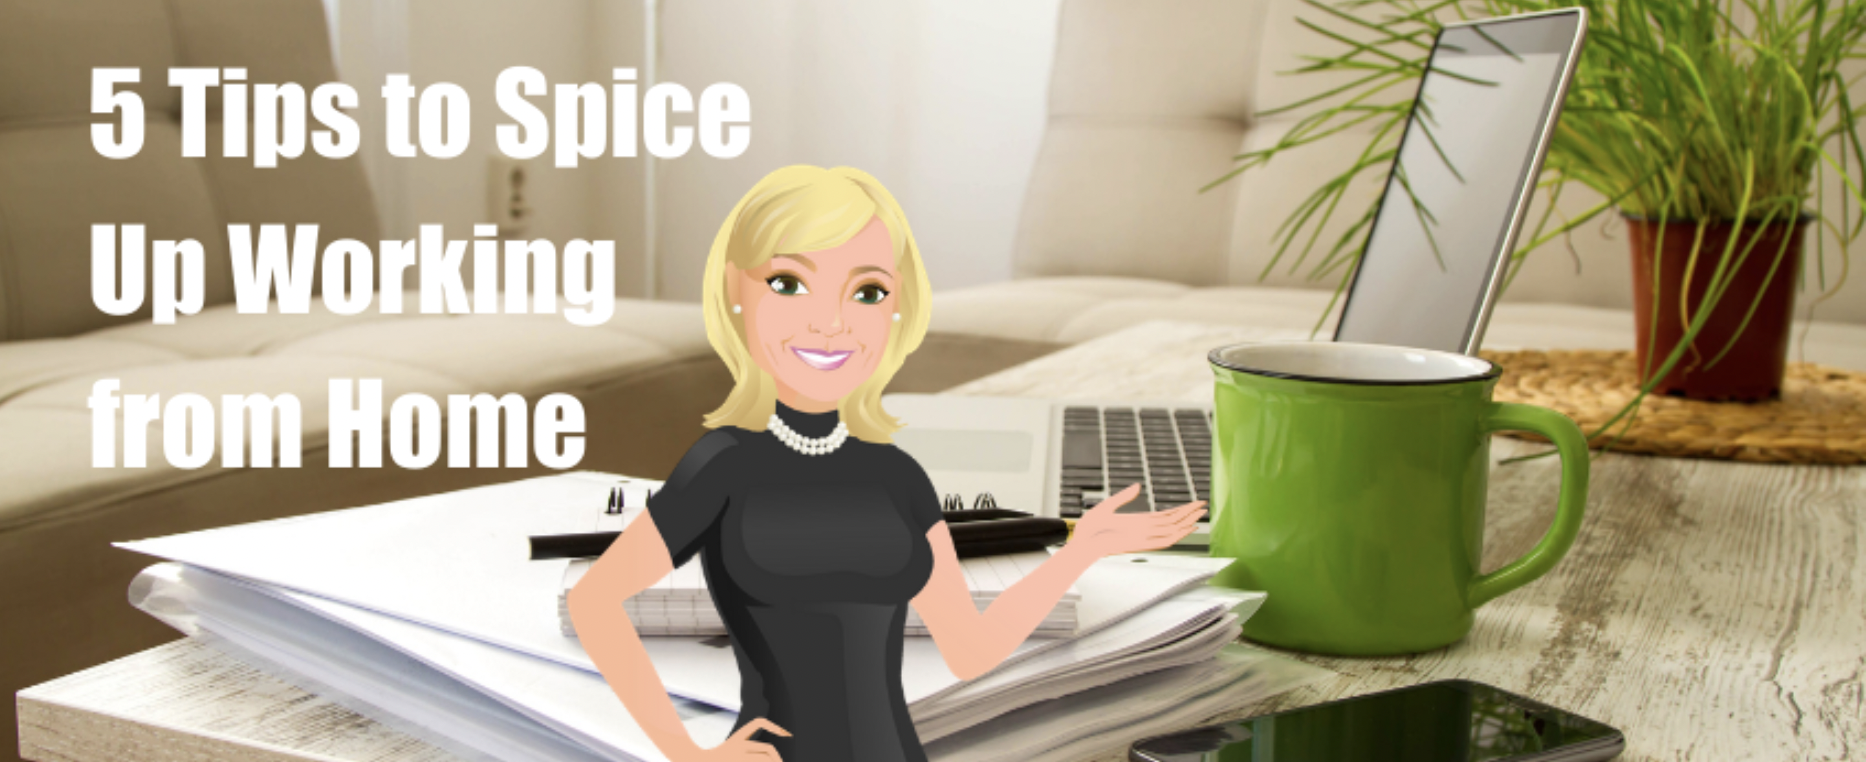 5 Tips to Spice Up Working from Home